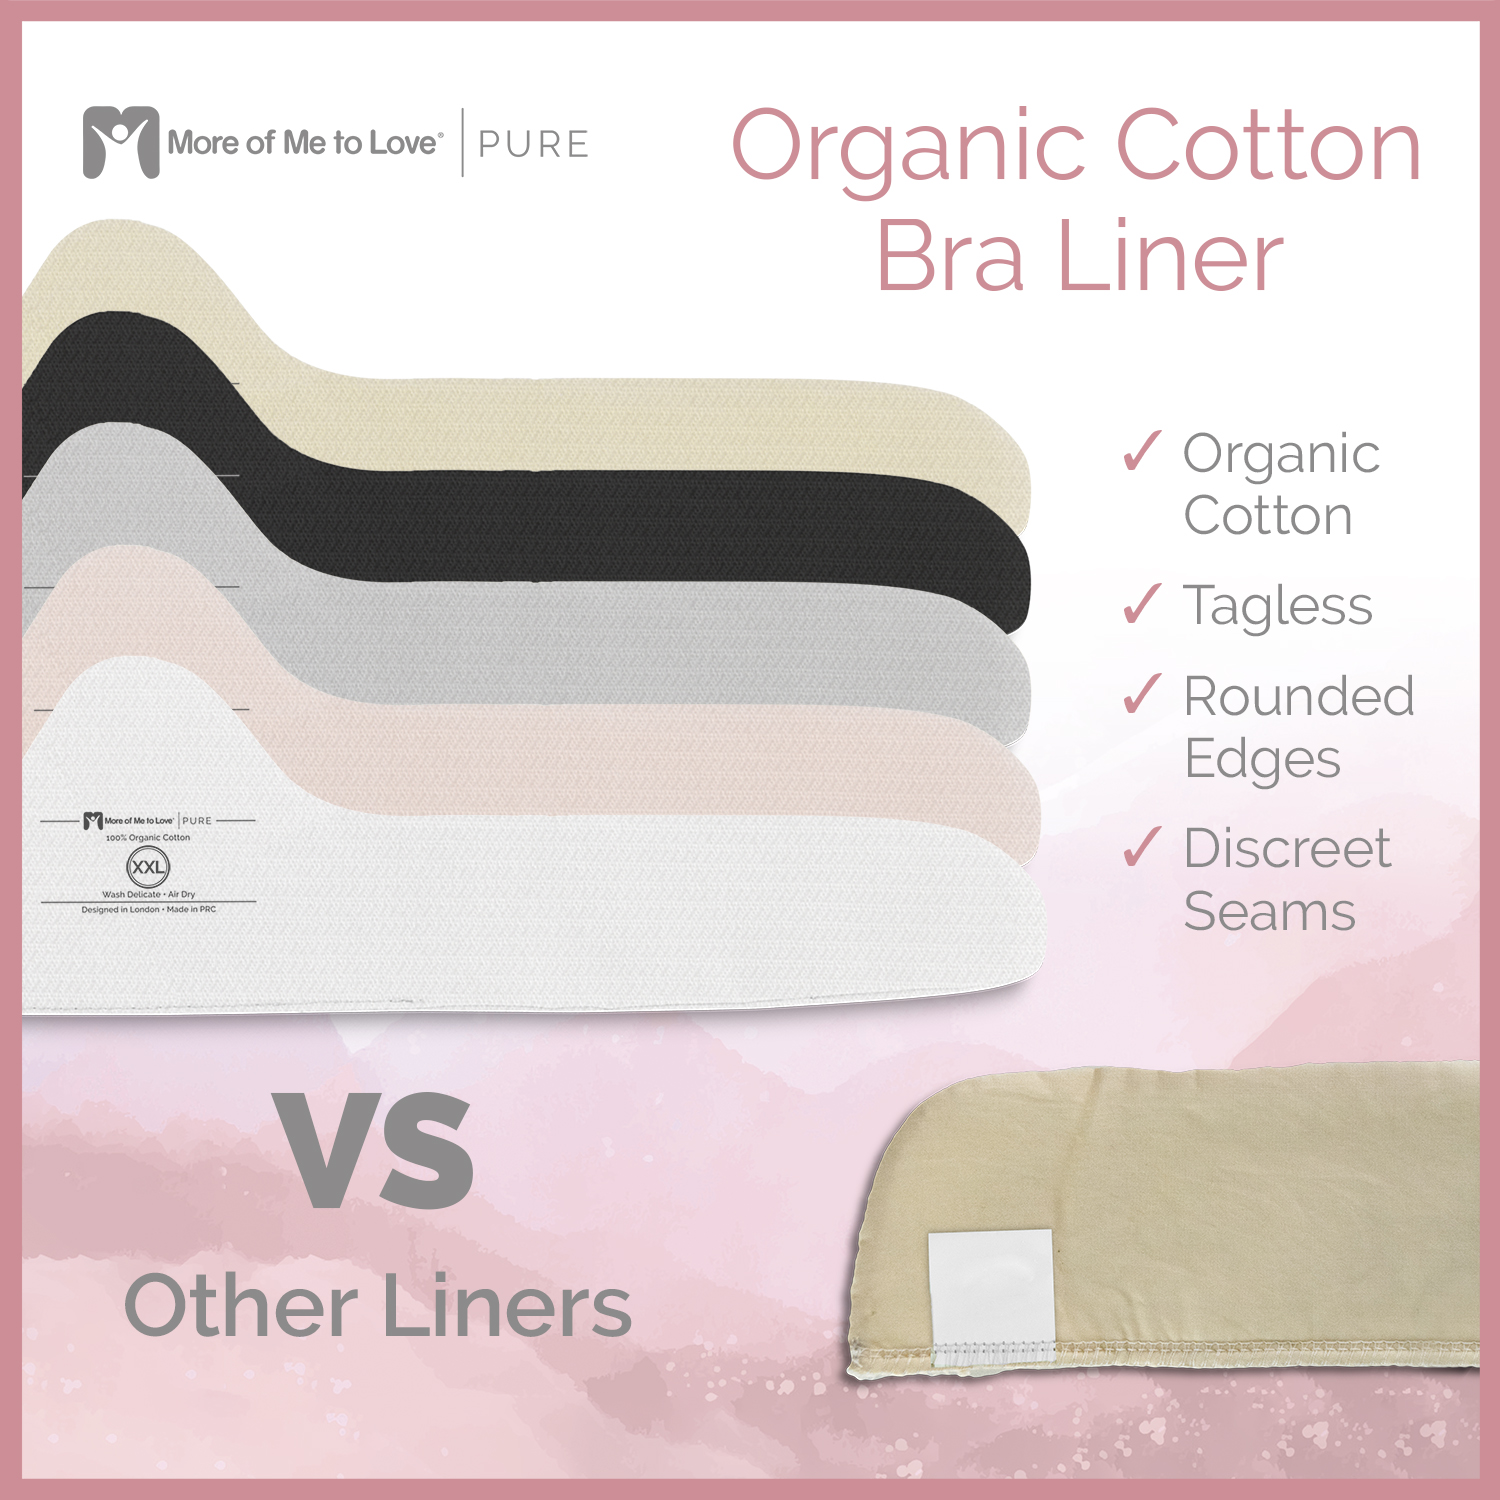 More of Me to Love Organic Cotton Bra Liner 4-Pack X-Large (Pearl